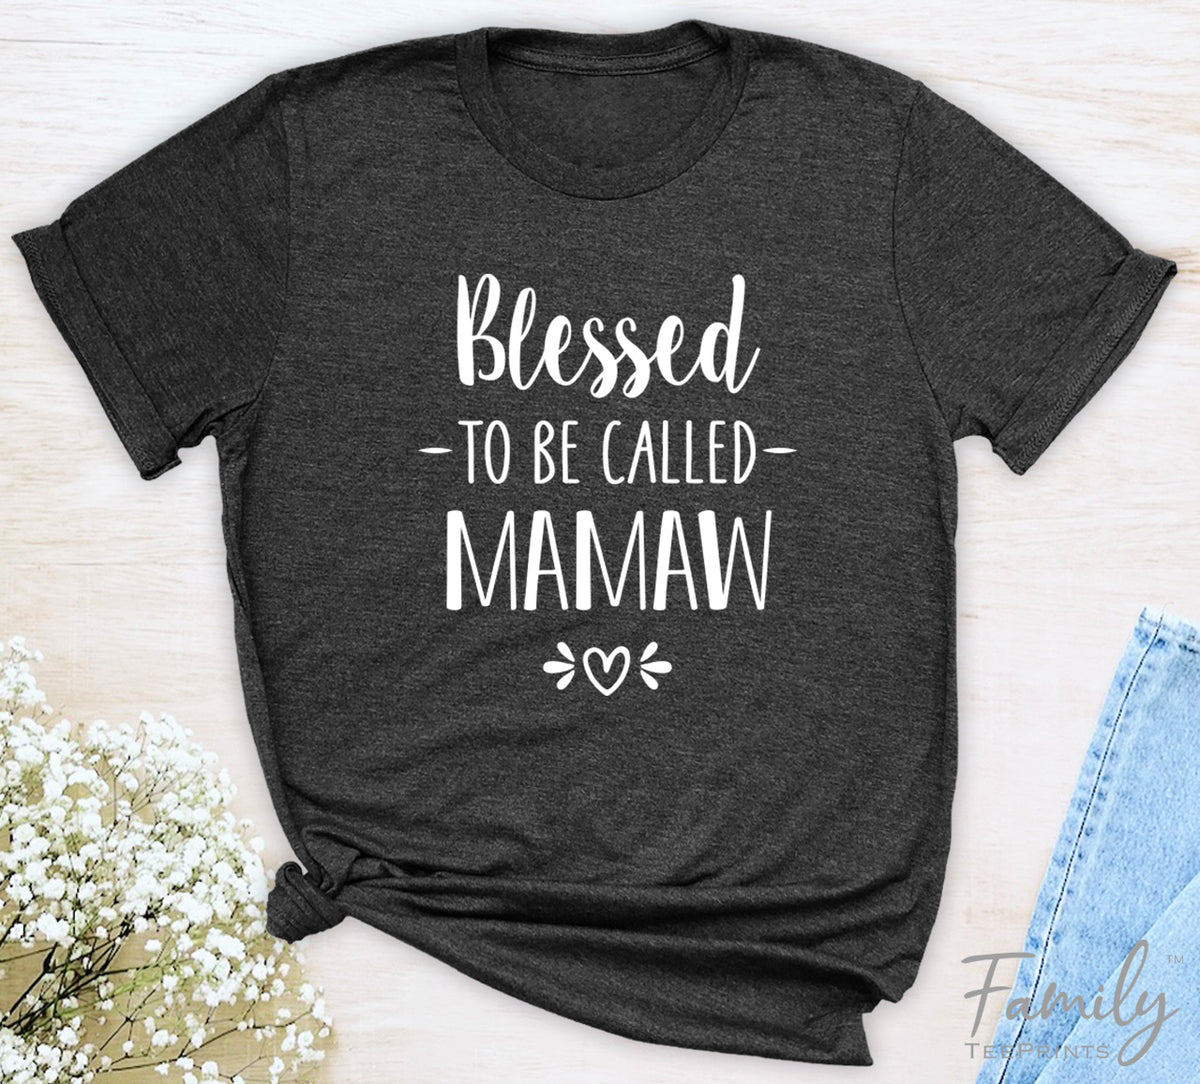 Blessed To Be Called Mamaw - Unisex T-shirt - Mamaw Shirt - Gift For New Mamaw - familyteeprints